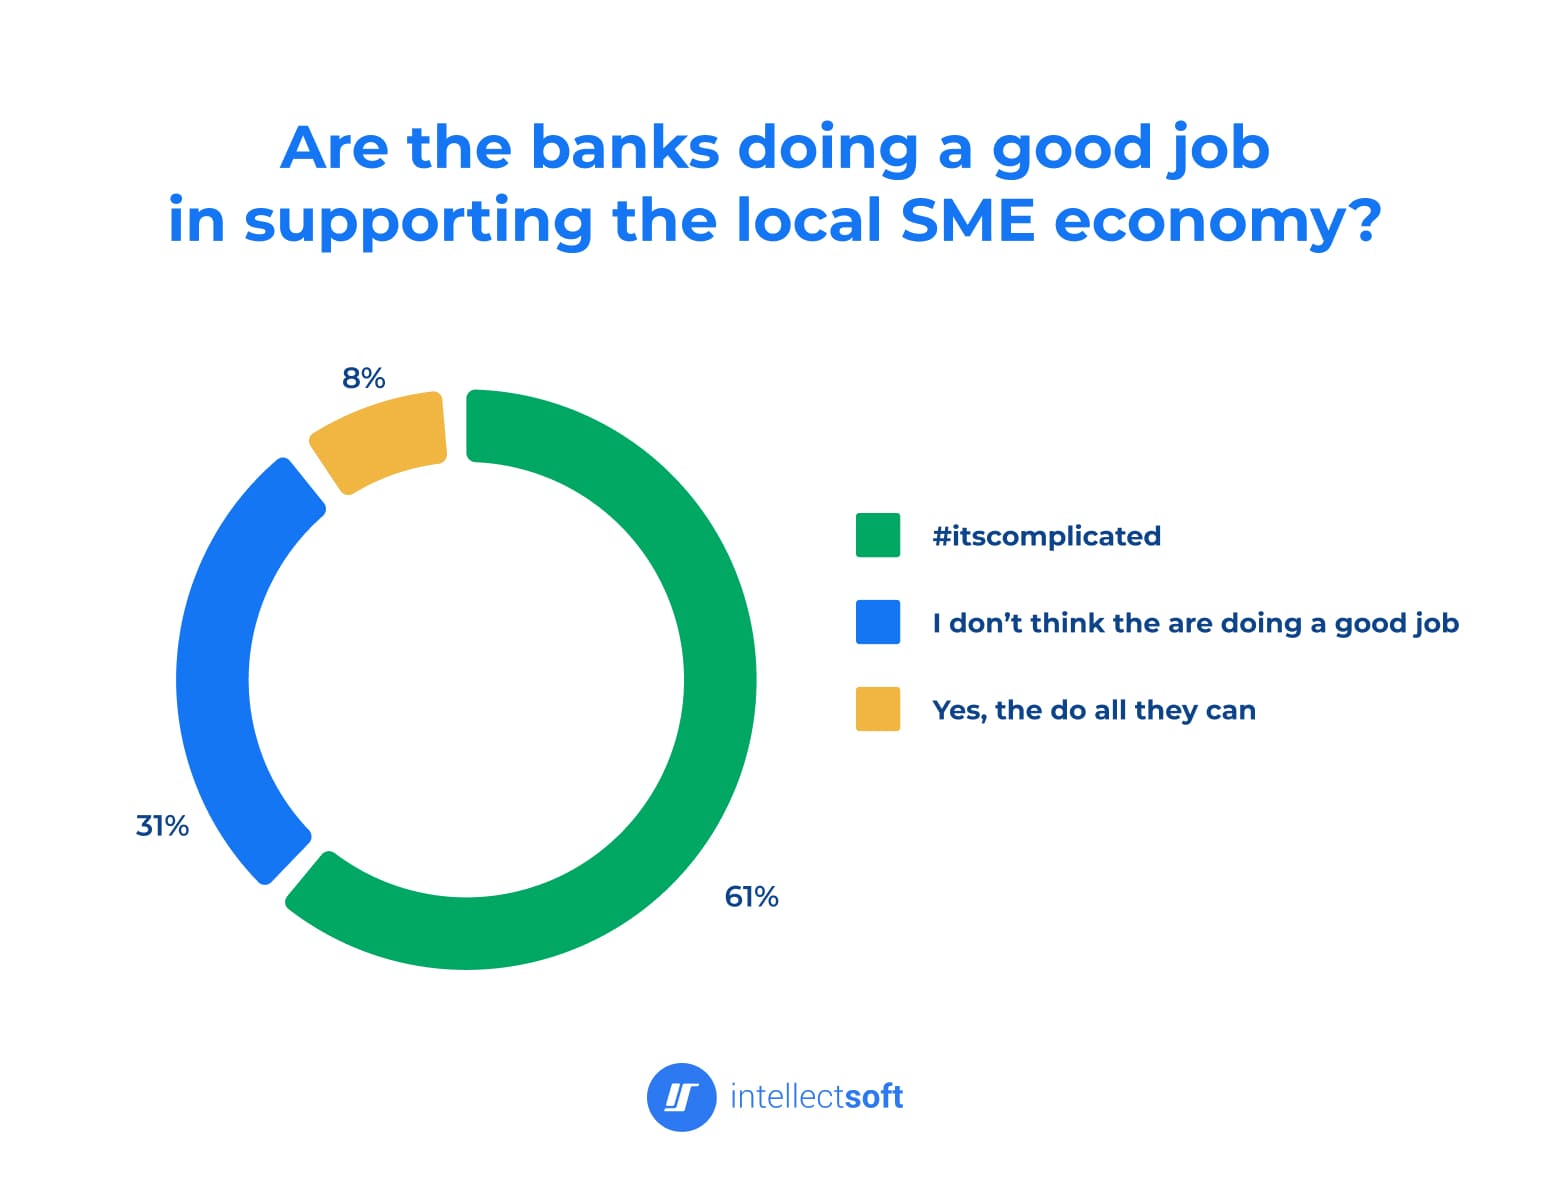 Diagram of banks' support for the local SME economy, in percentage.